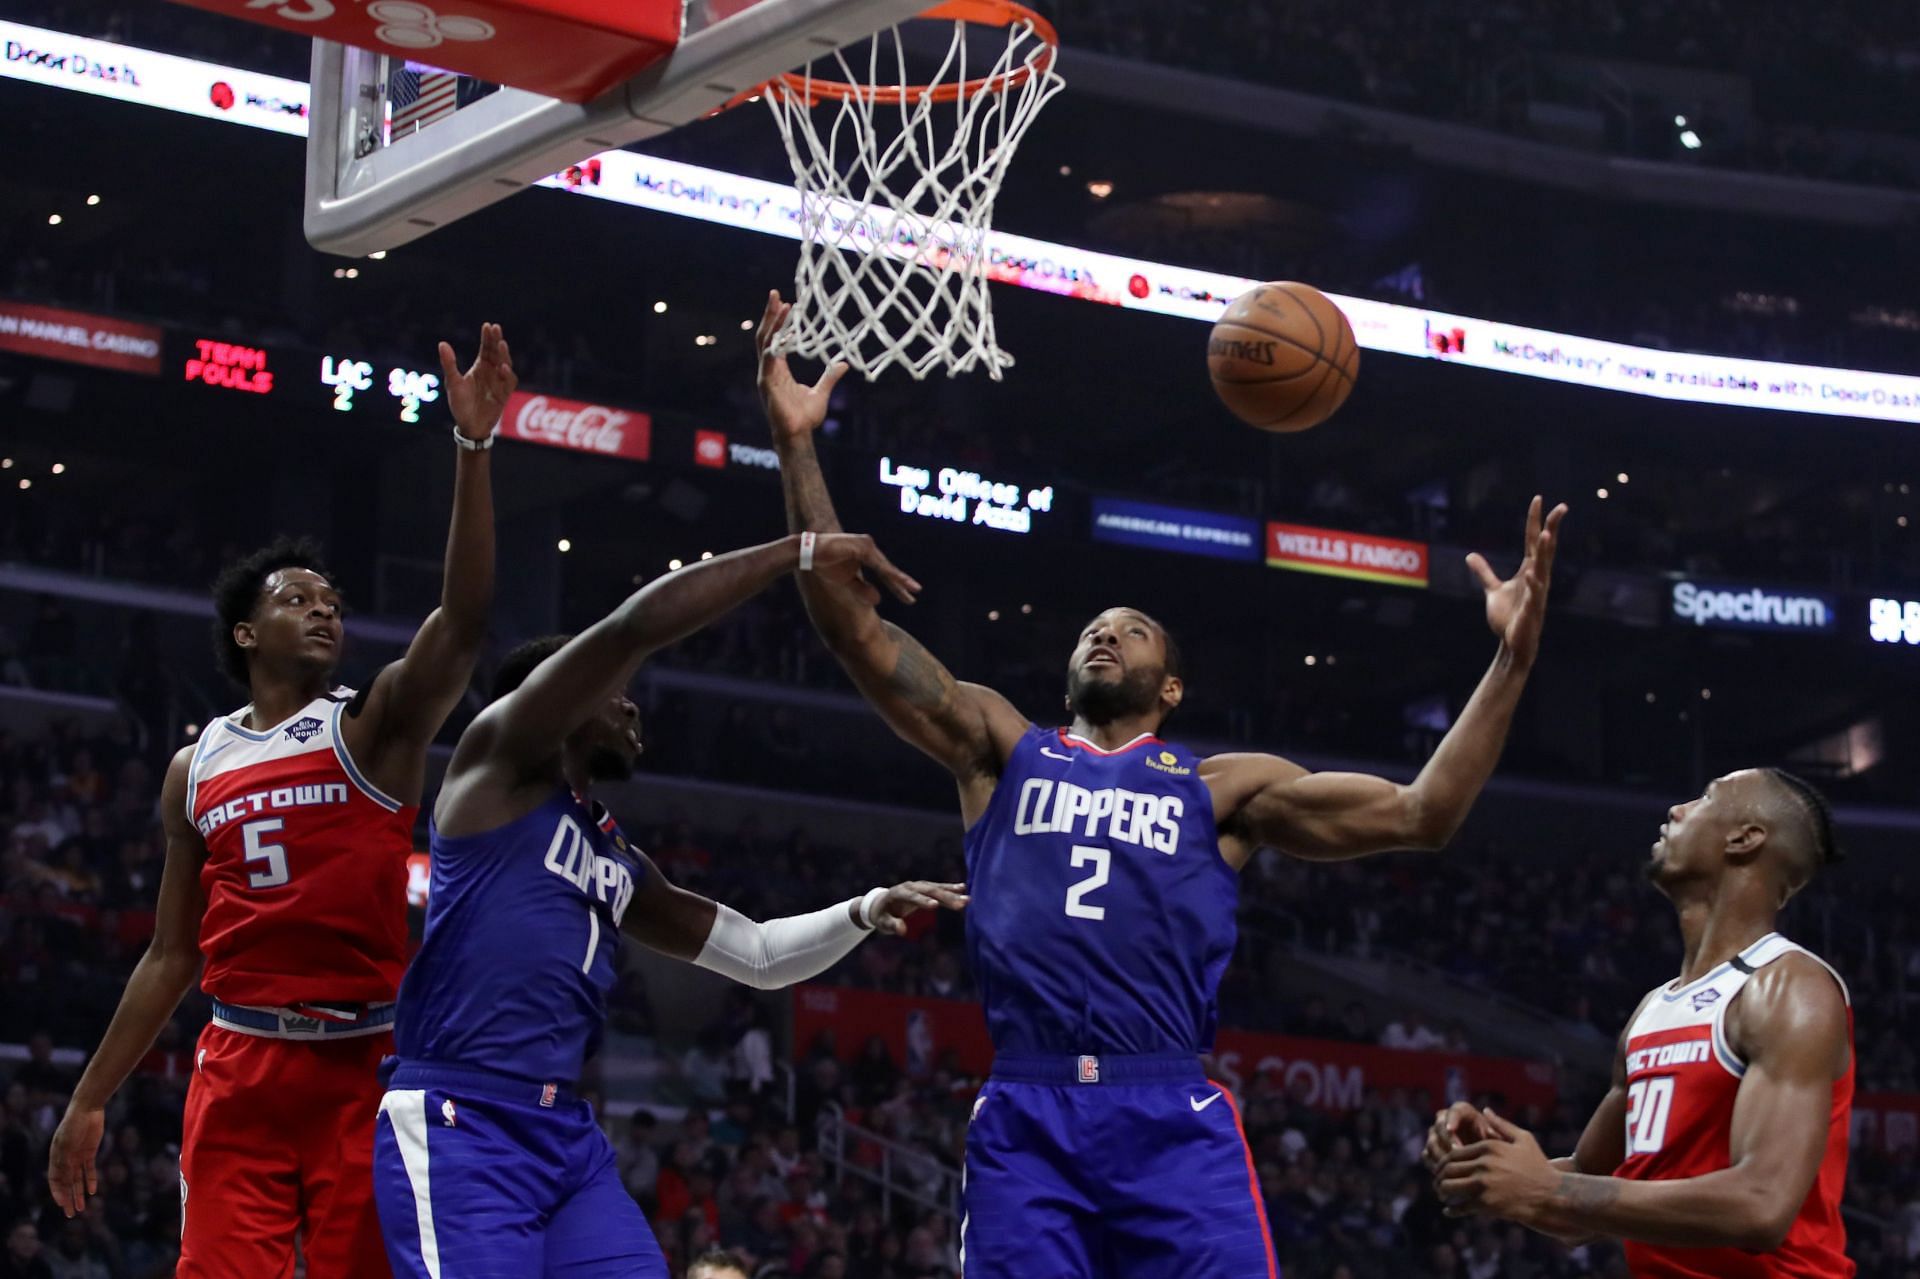 The LA Clippers will host the Sacramento Kings on December 1st.